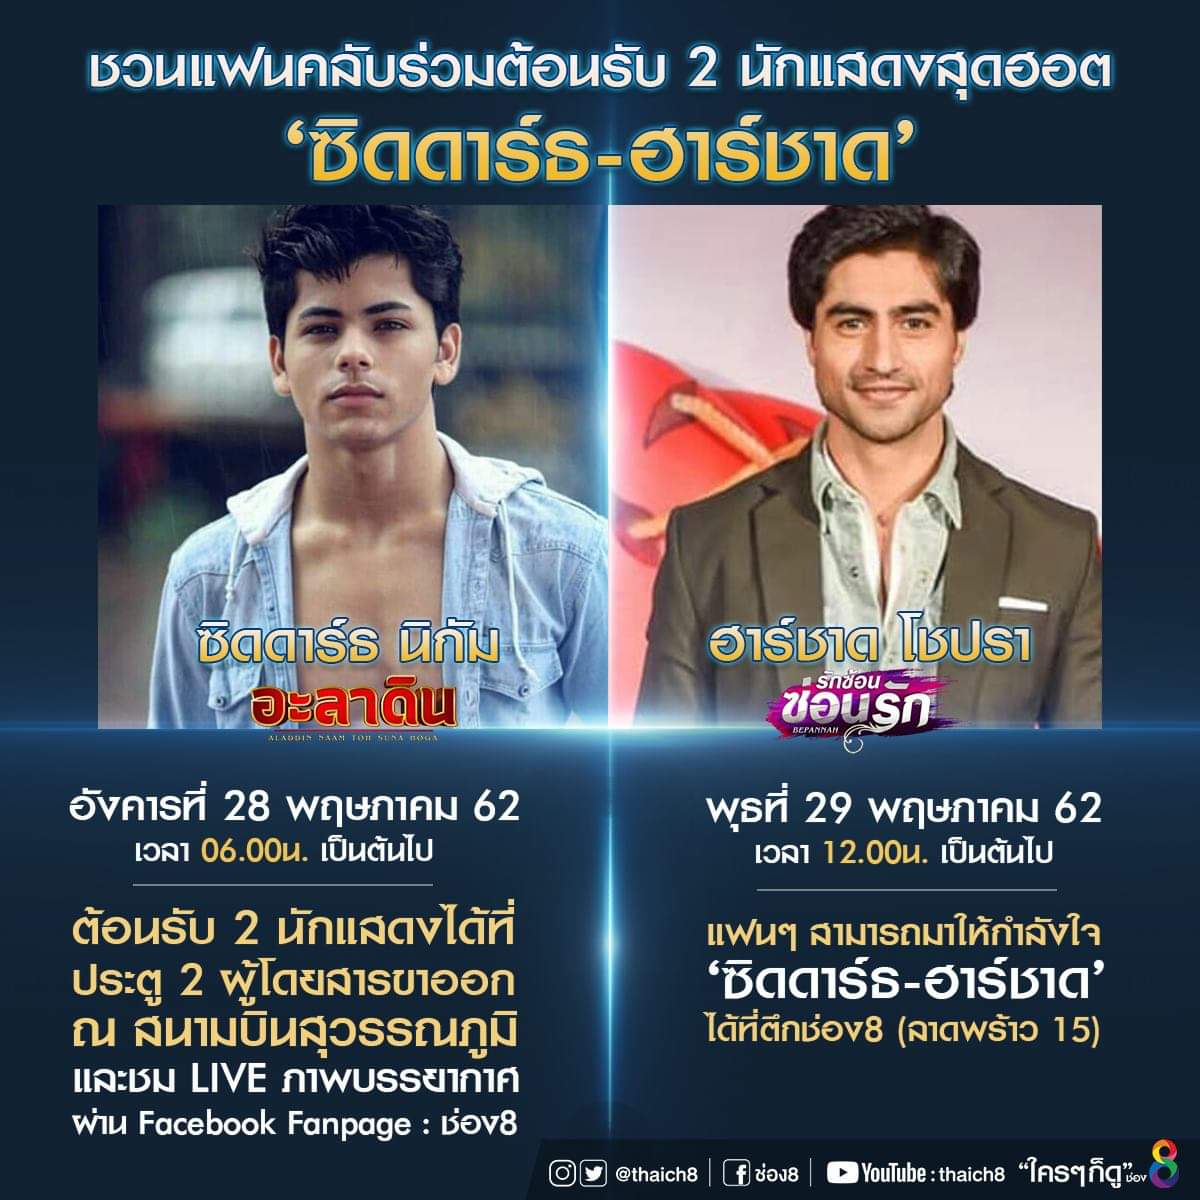 It started with this dhamaka posters by Ying Chopda a thai fan who told that  #HarshadChopda will be visiting thailand on 28th May 2019 for Fans Meet And Greet on popular demand and we all started waiting for it as we missed him so much  #1YearOfHarshadChopdaInThailand